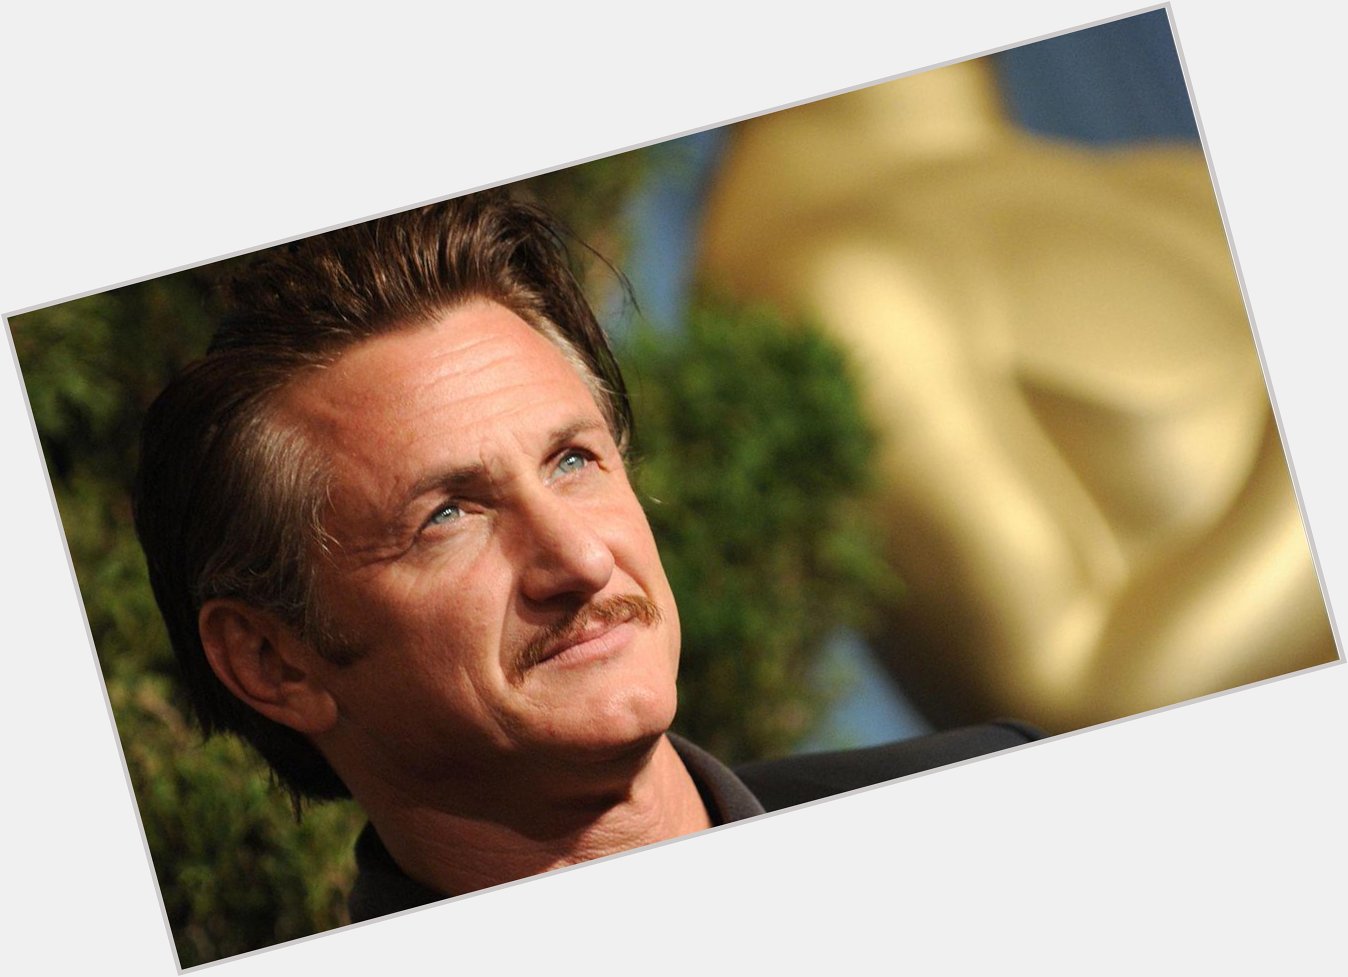 Happy birthday Sean Penn! In 2009 we spoke with him about art, life, politics, \Milk\ and 